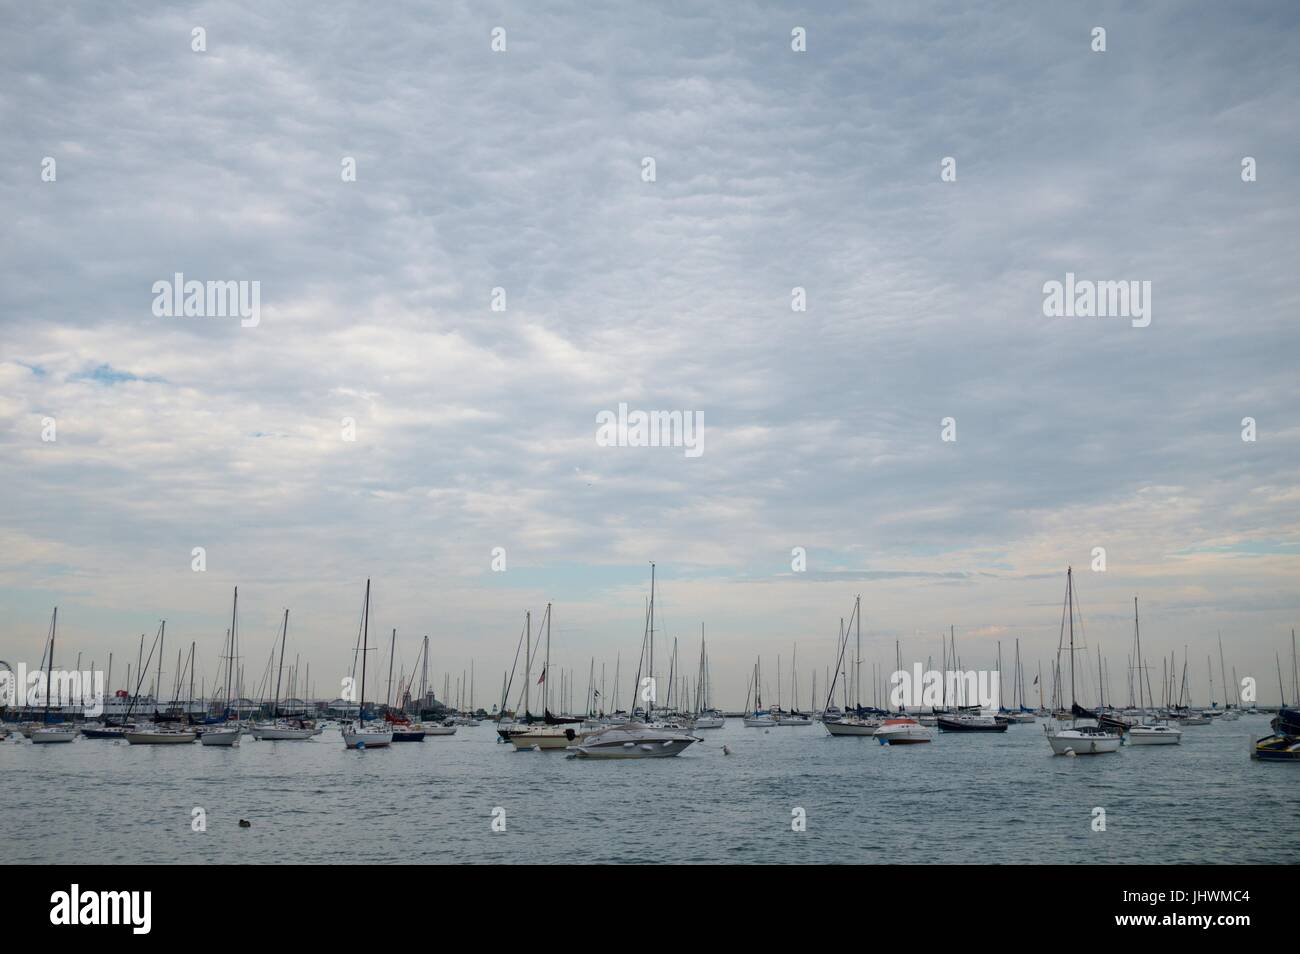 Boats on the water at the Chicago Harbors on lake Michigan, Chicago, IL, USA. Stock Photo